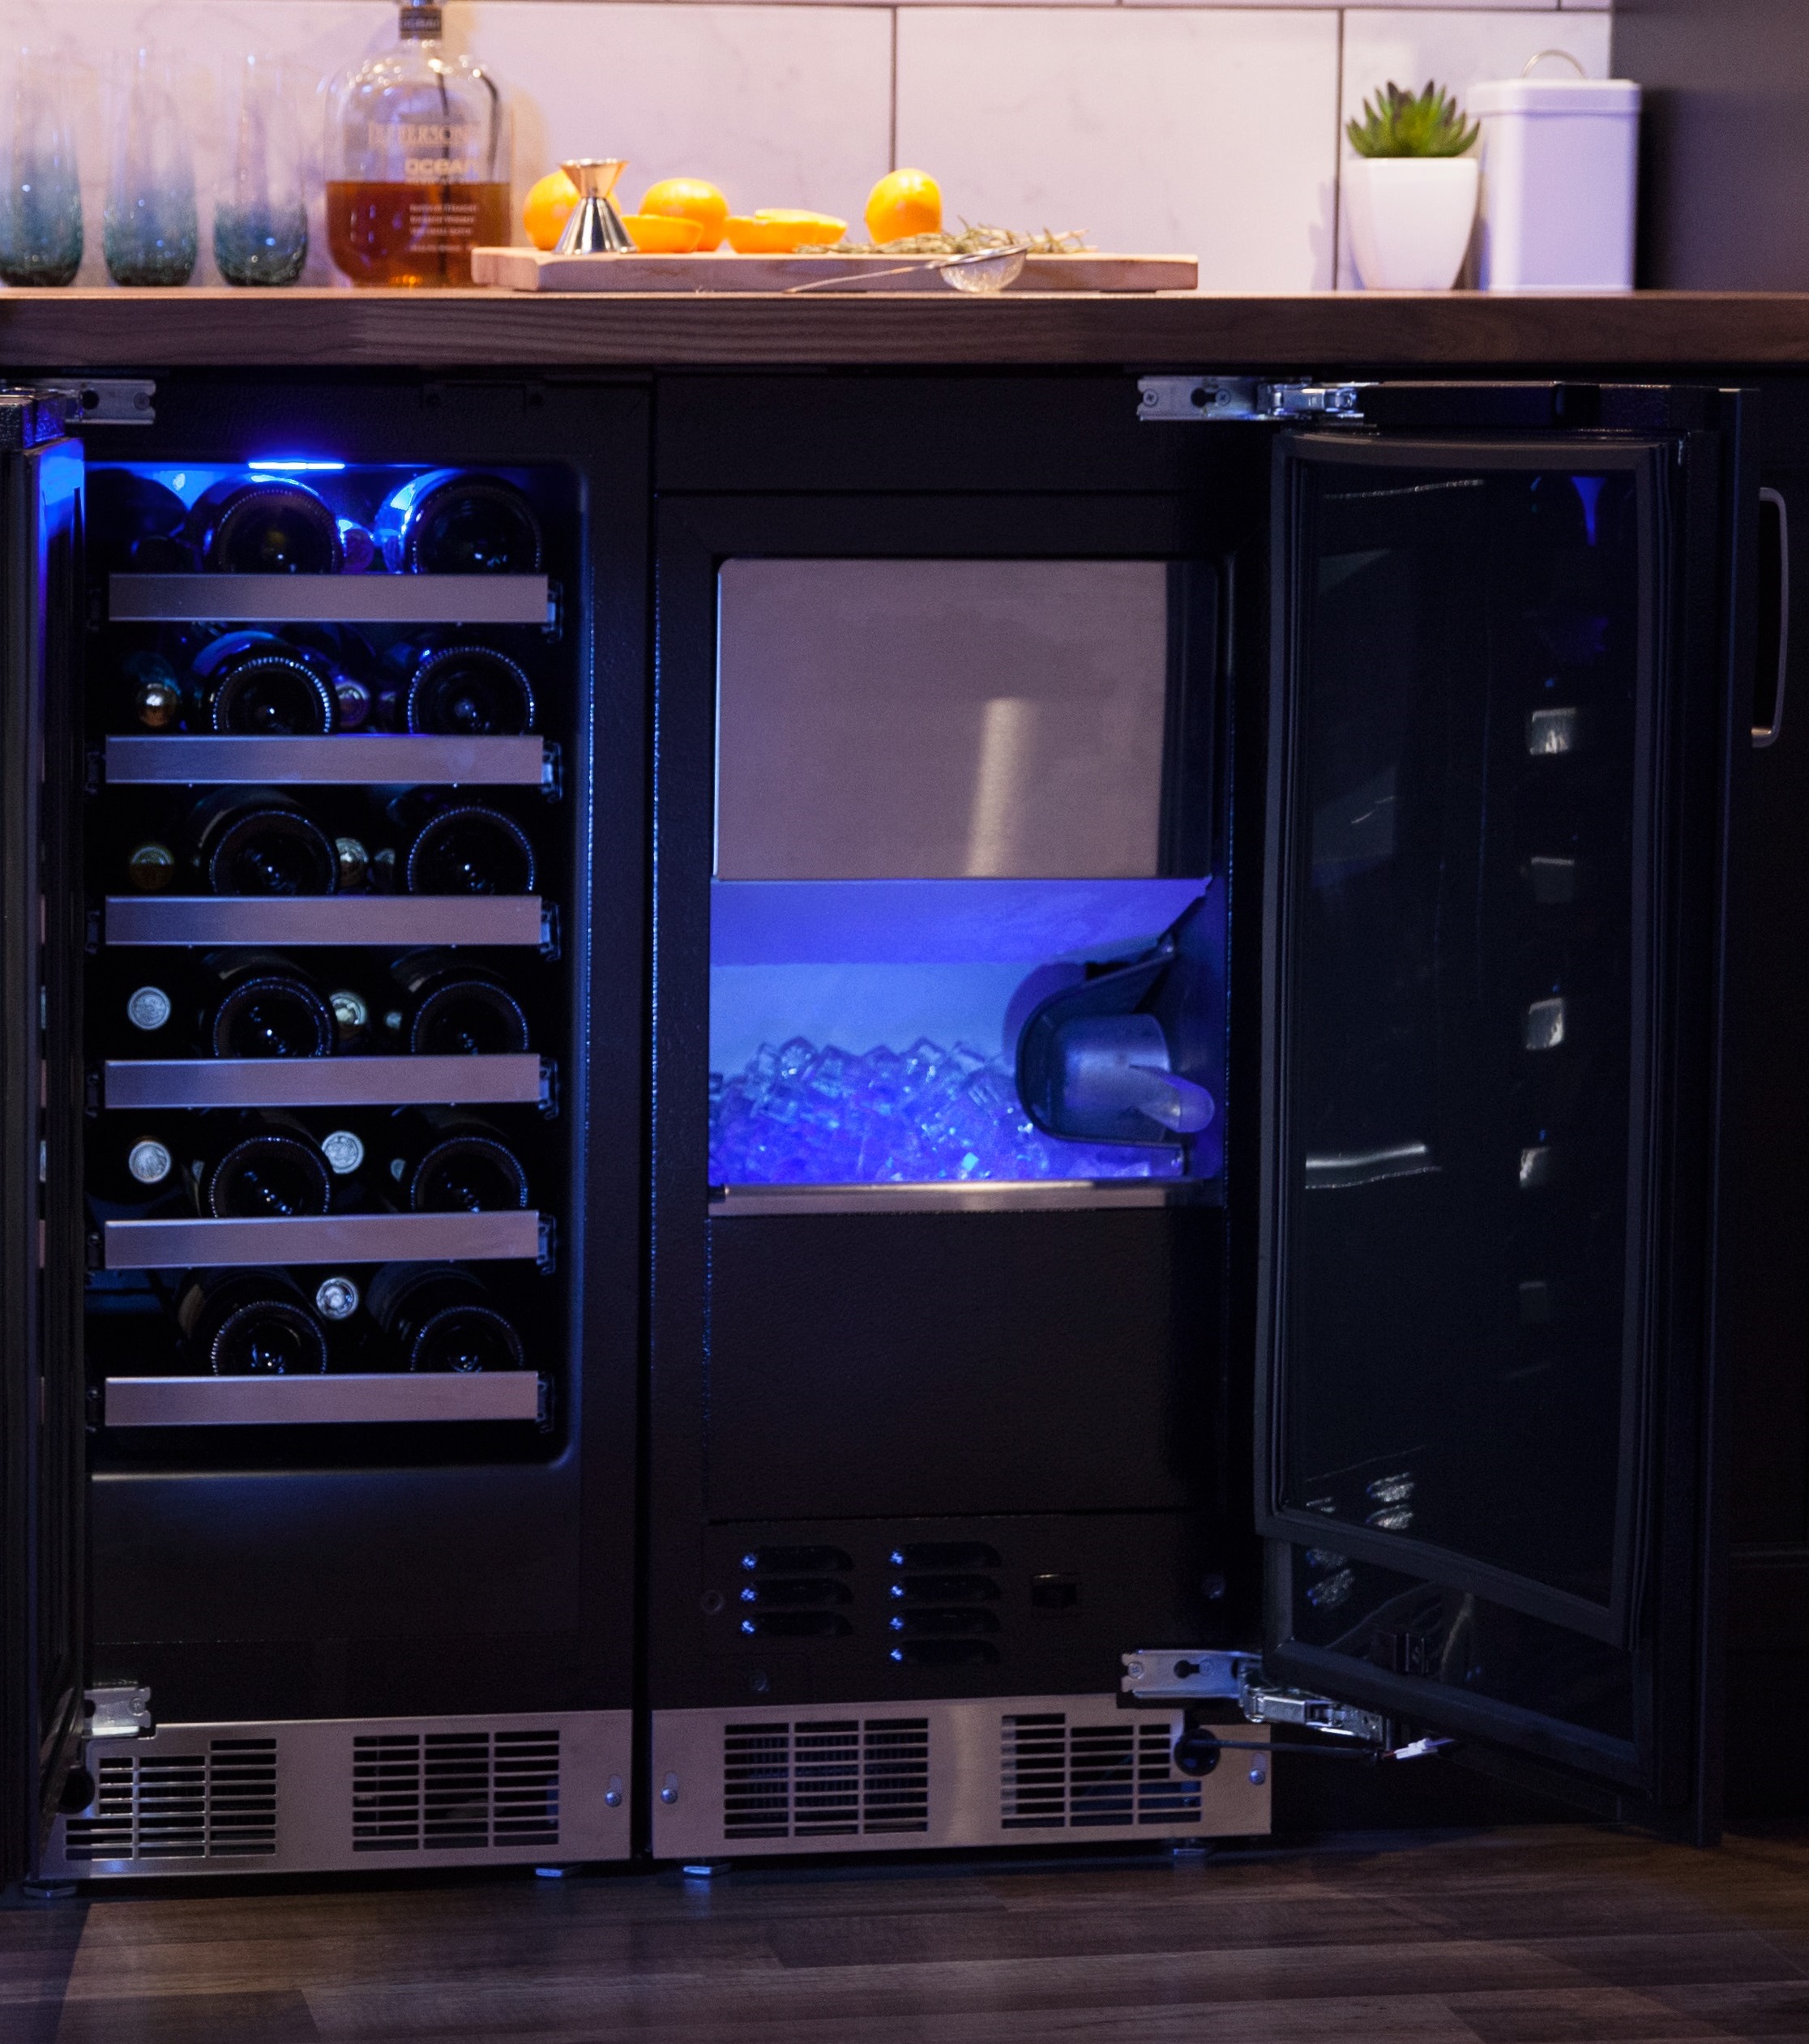 Pictured: Marvel Professional Single Zone Wine Cellar paired with the new Marvel Professional Clear Ice Machine with Sapphire Illuminice Lighting